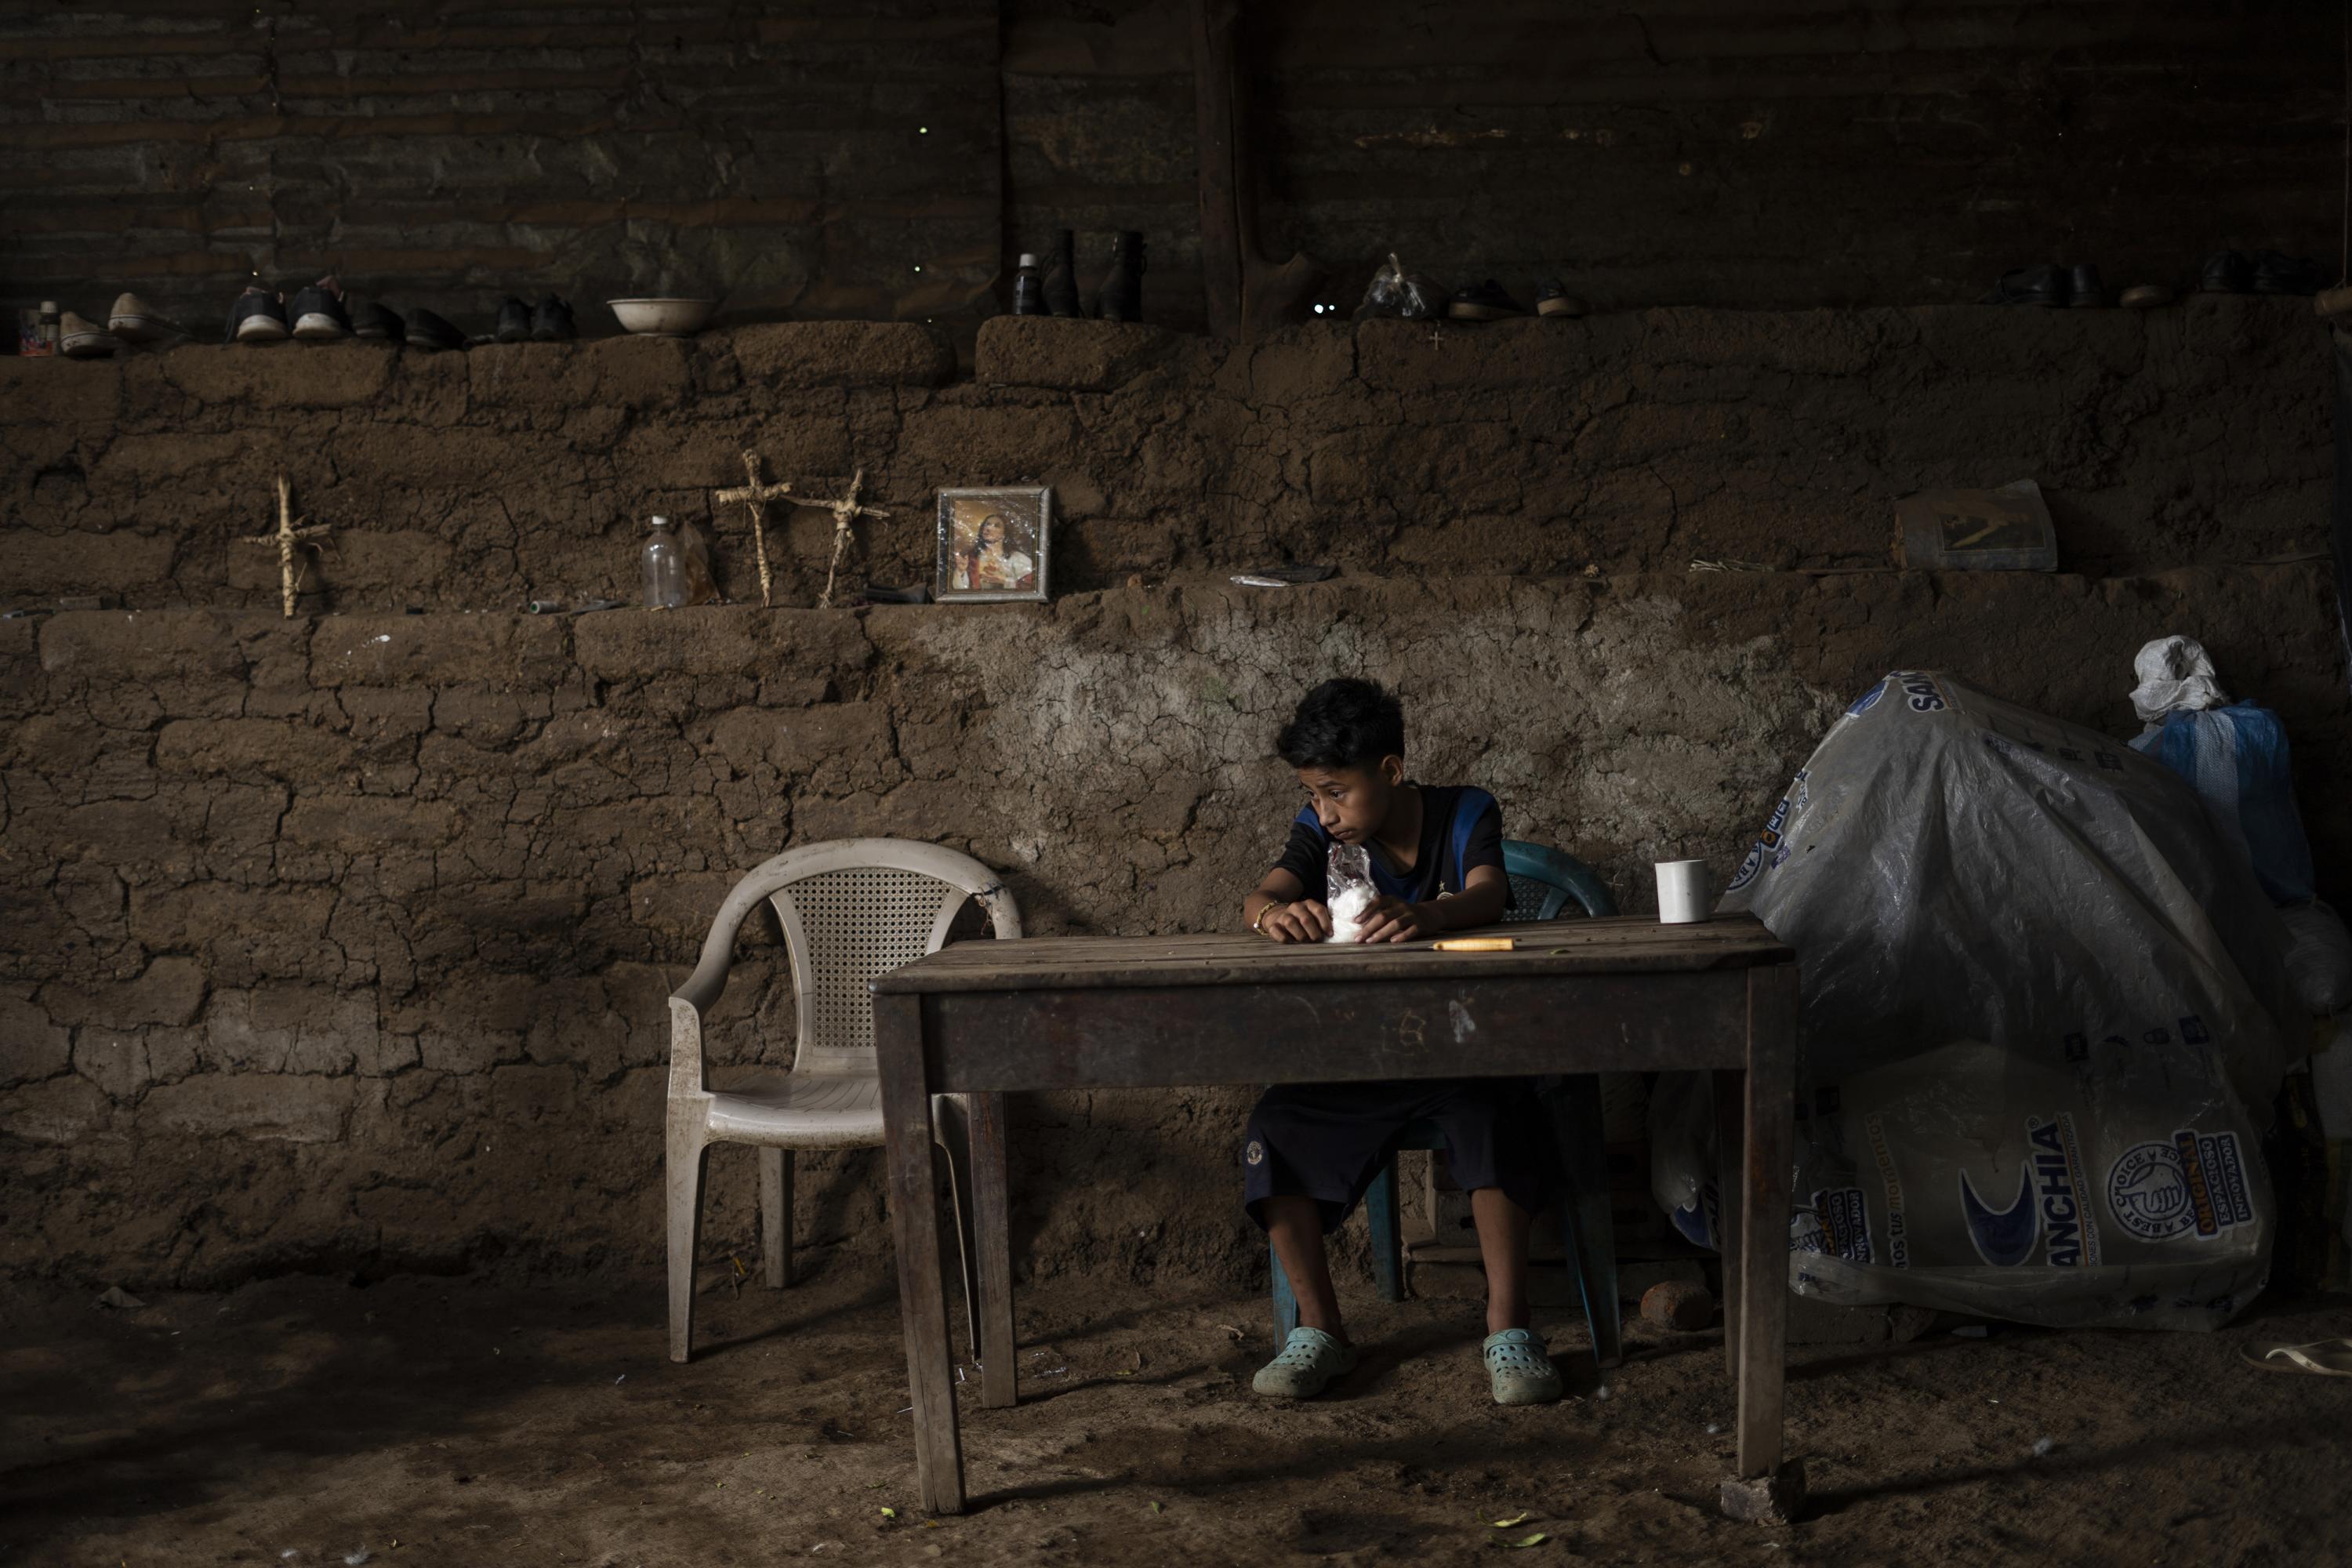 On May 2, 2023, Celia’s 13-year-old son, Ronald, had been vomiting and suffering a fever and headache for three days, without access to medical care. The only intervention available was to take him out of school for the week. Photo Víctor Peña